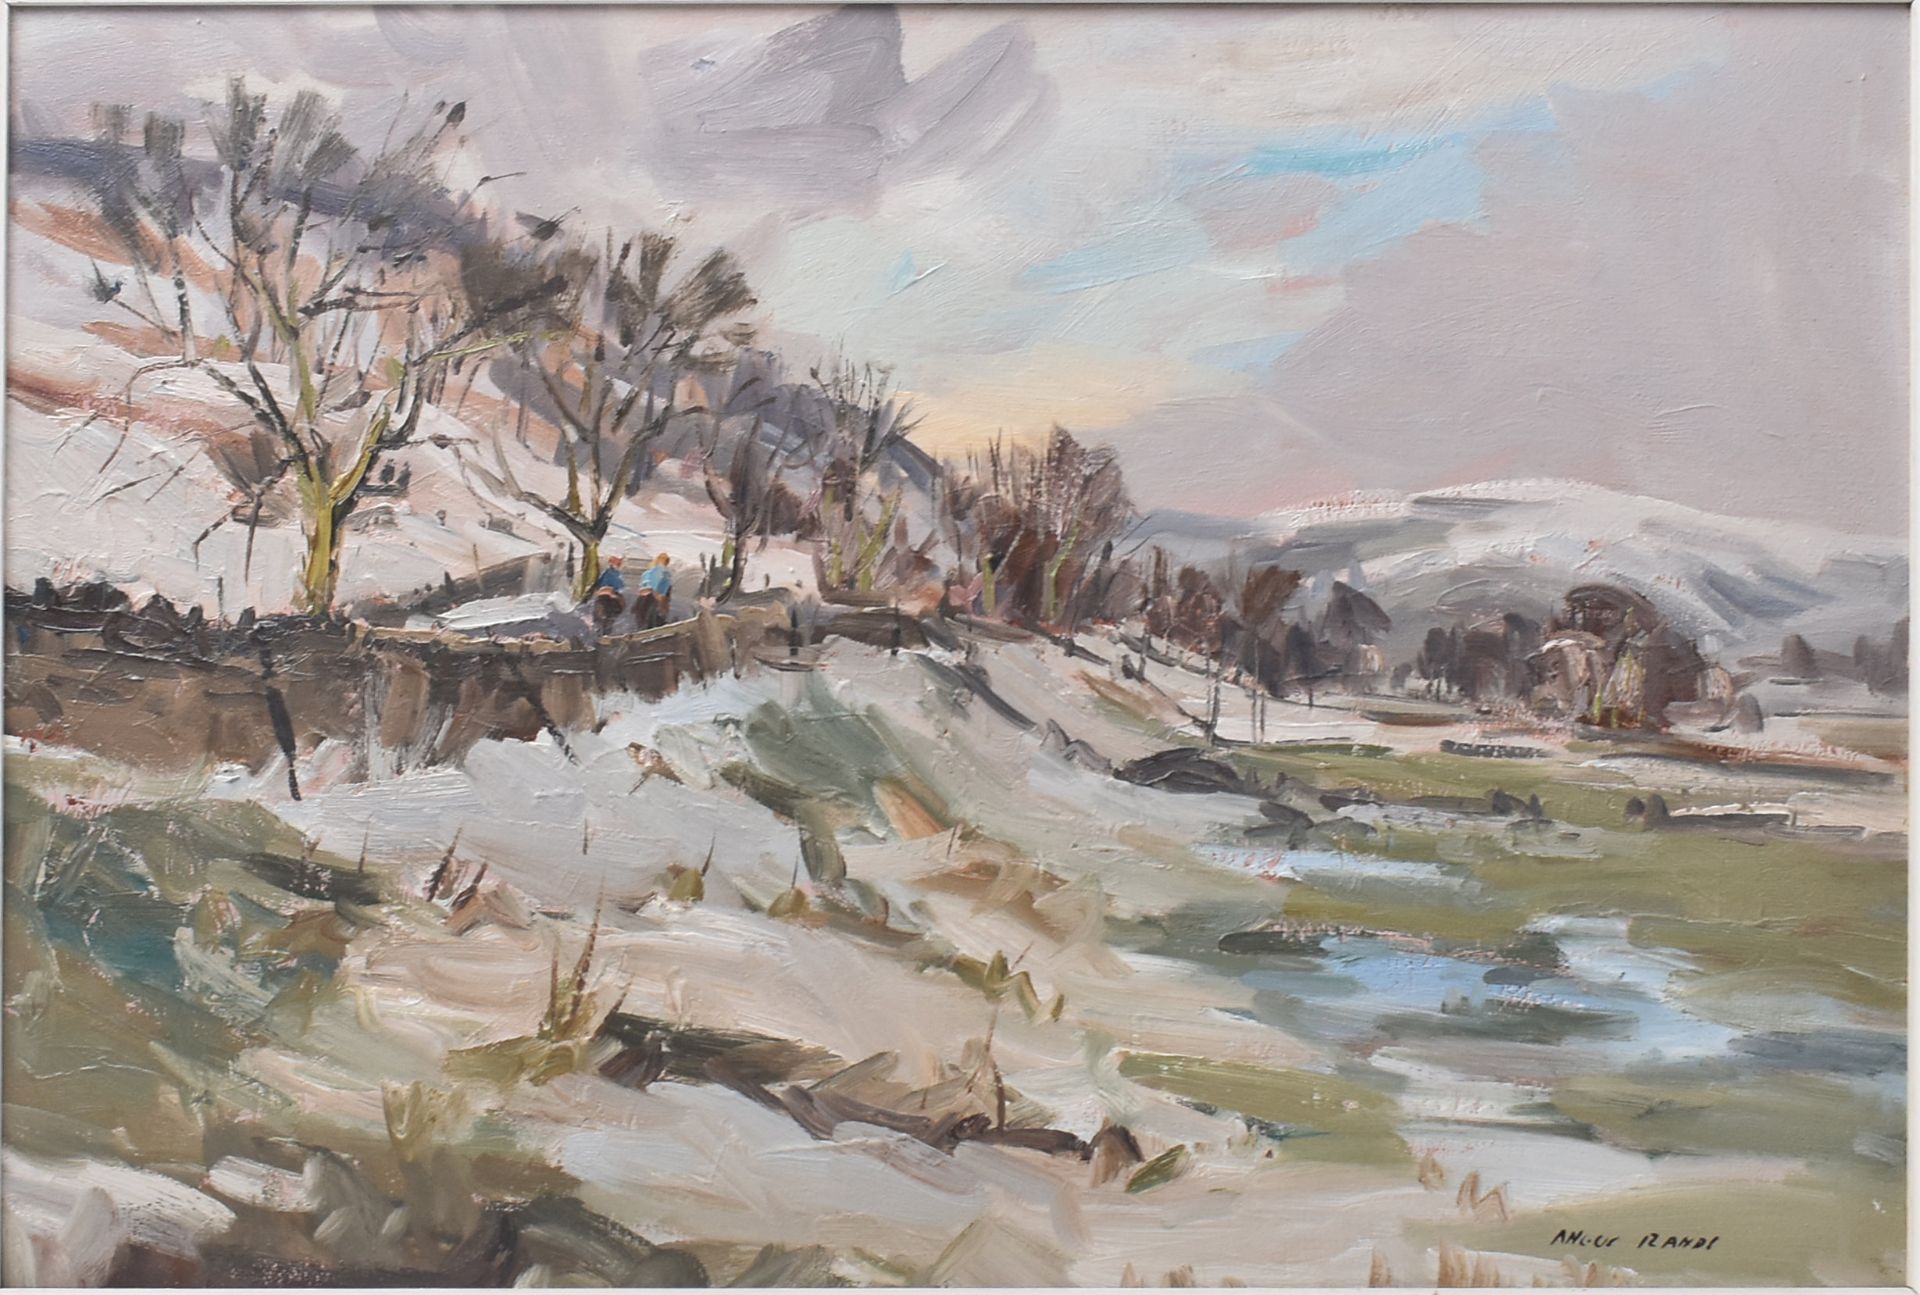 ANGUS RANDS - TOWARDS KETTLEWELL - OIL ON BOARD PAINTING